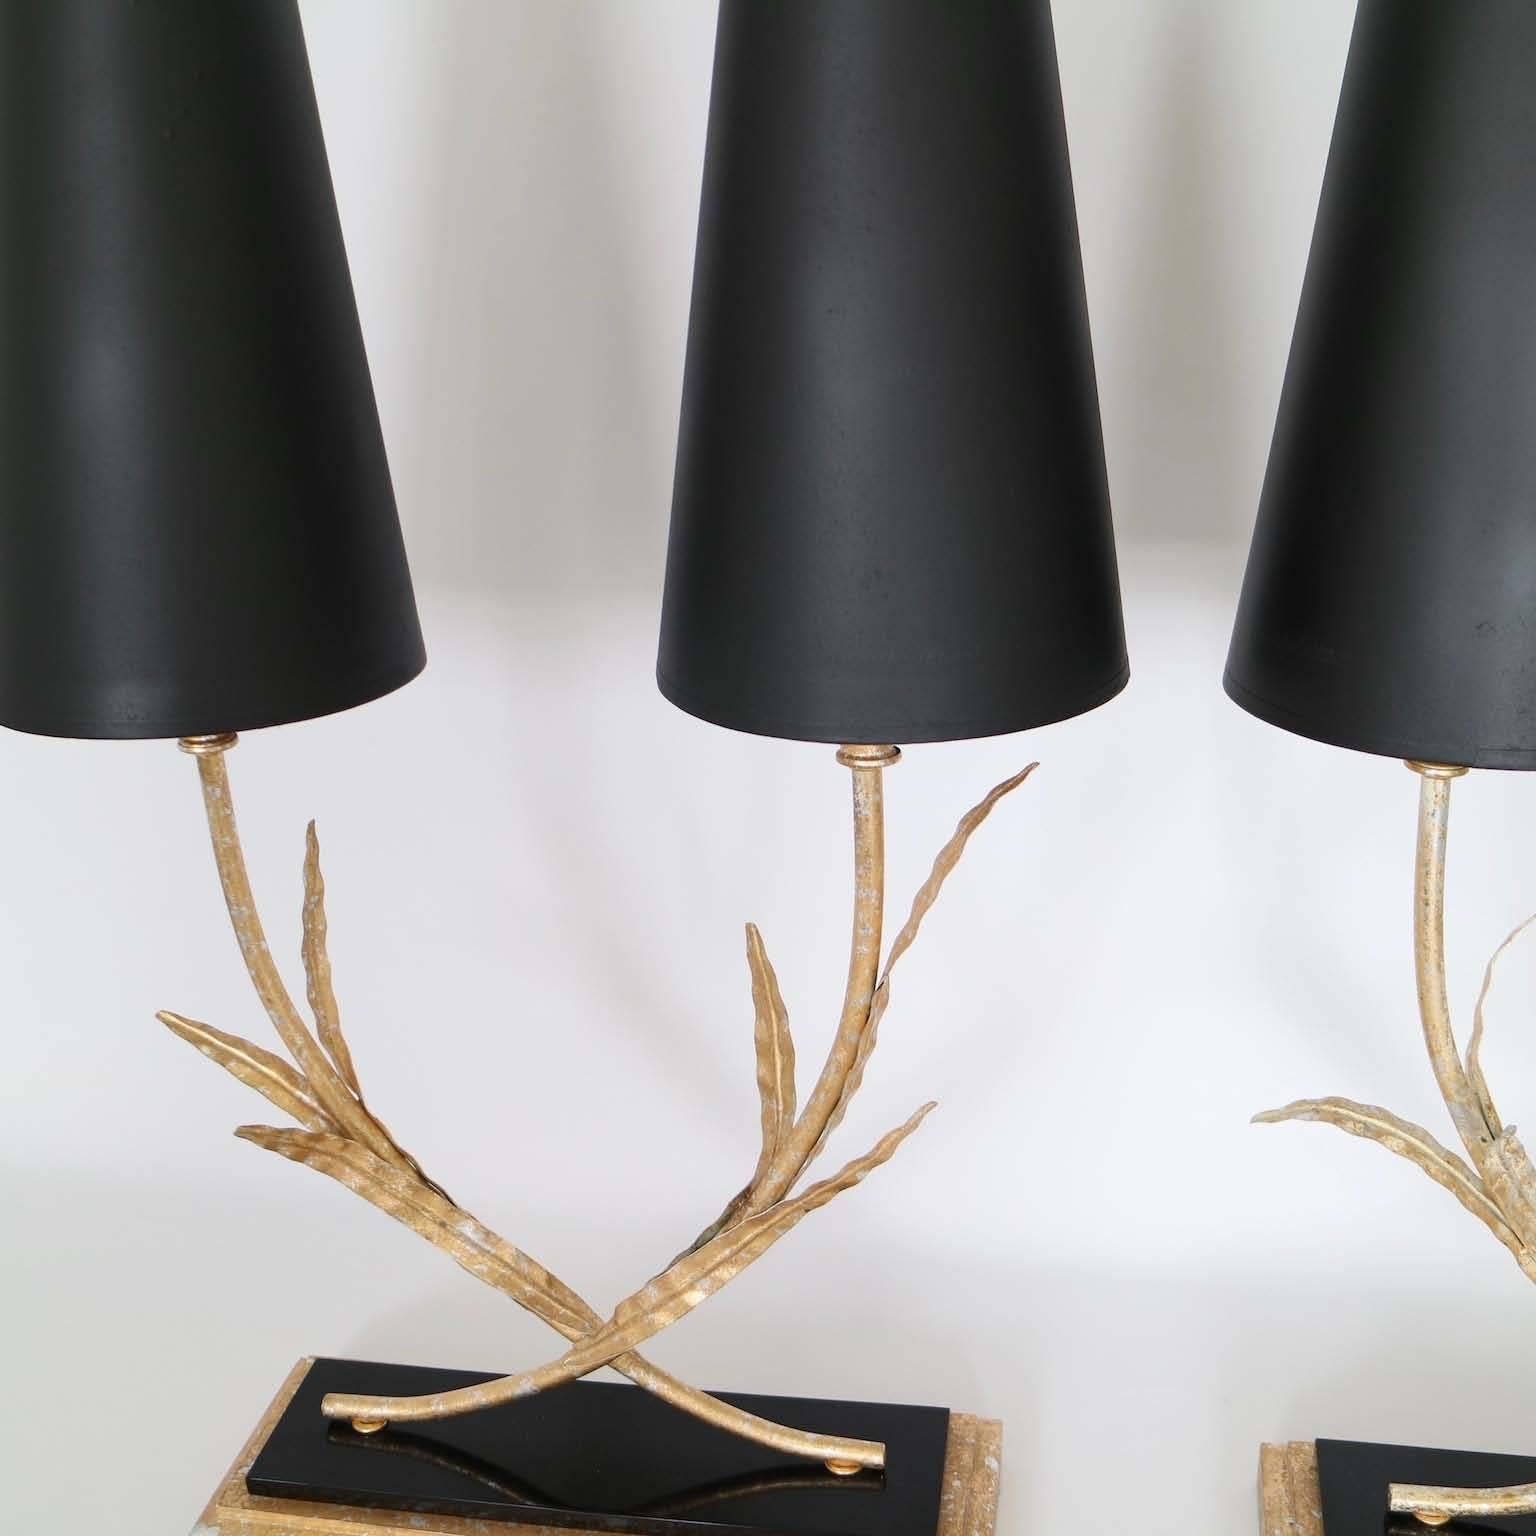 Pair of Mid-Century Modern gilt and plated tole lamps, produced, circa 1950s, each with double socket, mounted on a wood base with black lucite accent; includes black shades. The lamps remain in perfect vintage condition, newly wired. The noted